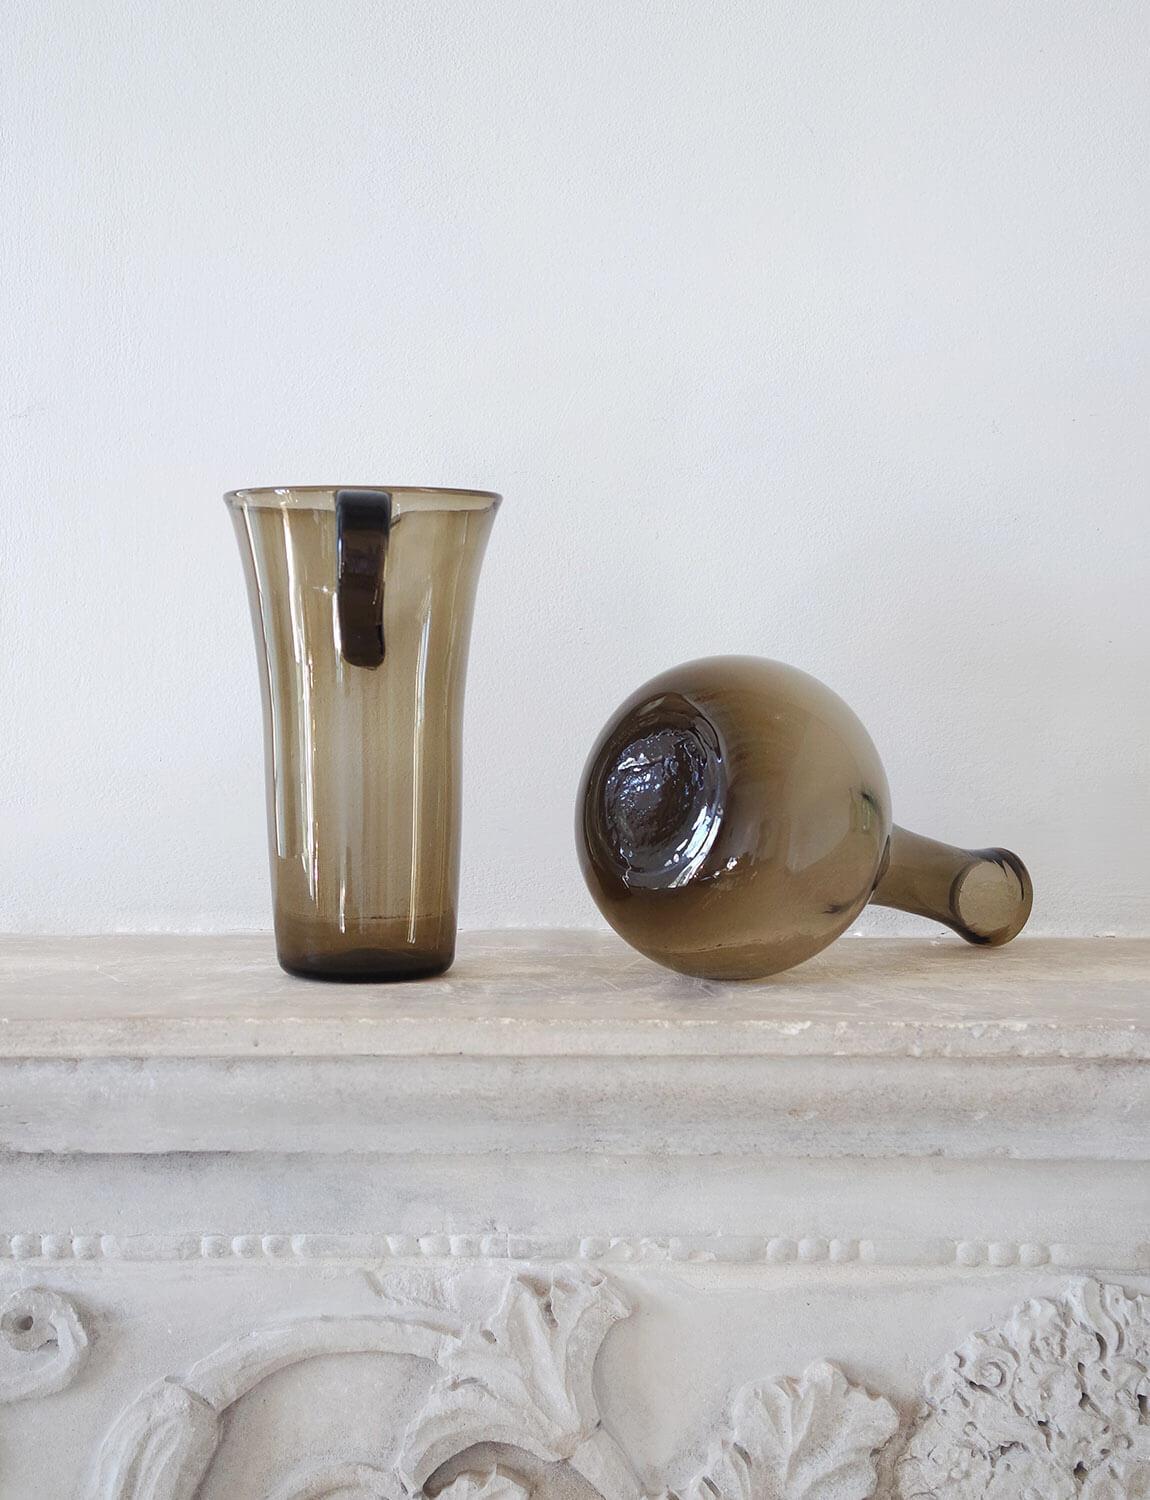 A hand-blown Empoli Glass water jug/pitcher AND wine bottle in brown / grey coloured glass. Made in Empoli in the 1950s, this bottle was found alongside a very few remaining pieces of Empoli Glass. Empoli is the town in Tuscany renowned for its